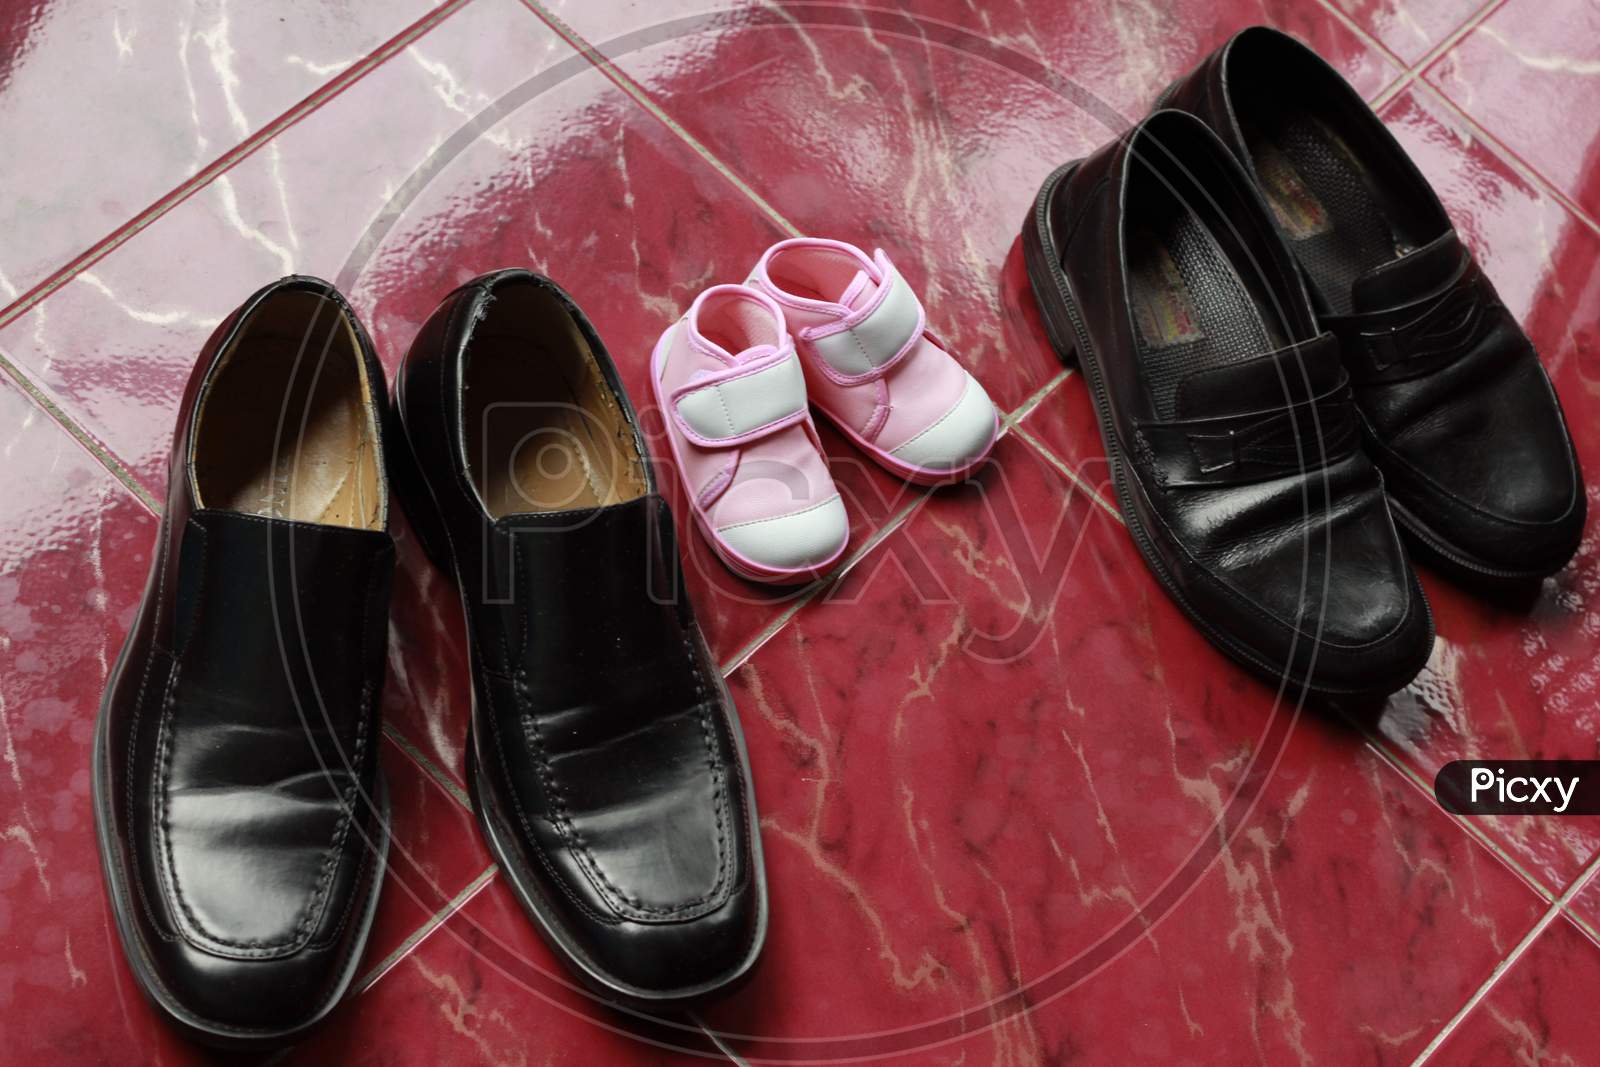 Girl baby shoes between two pairs of adult leather shoes